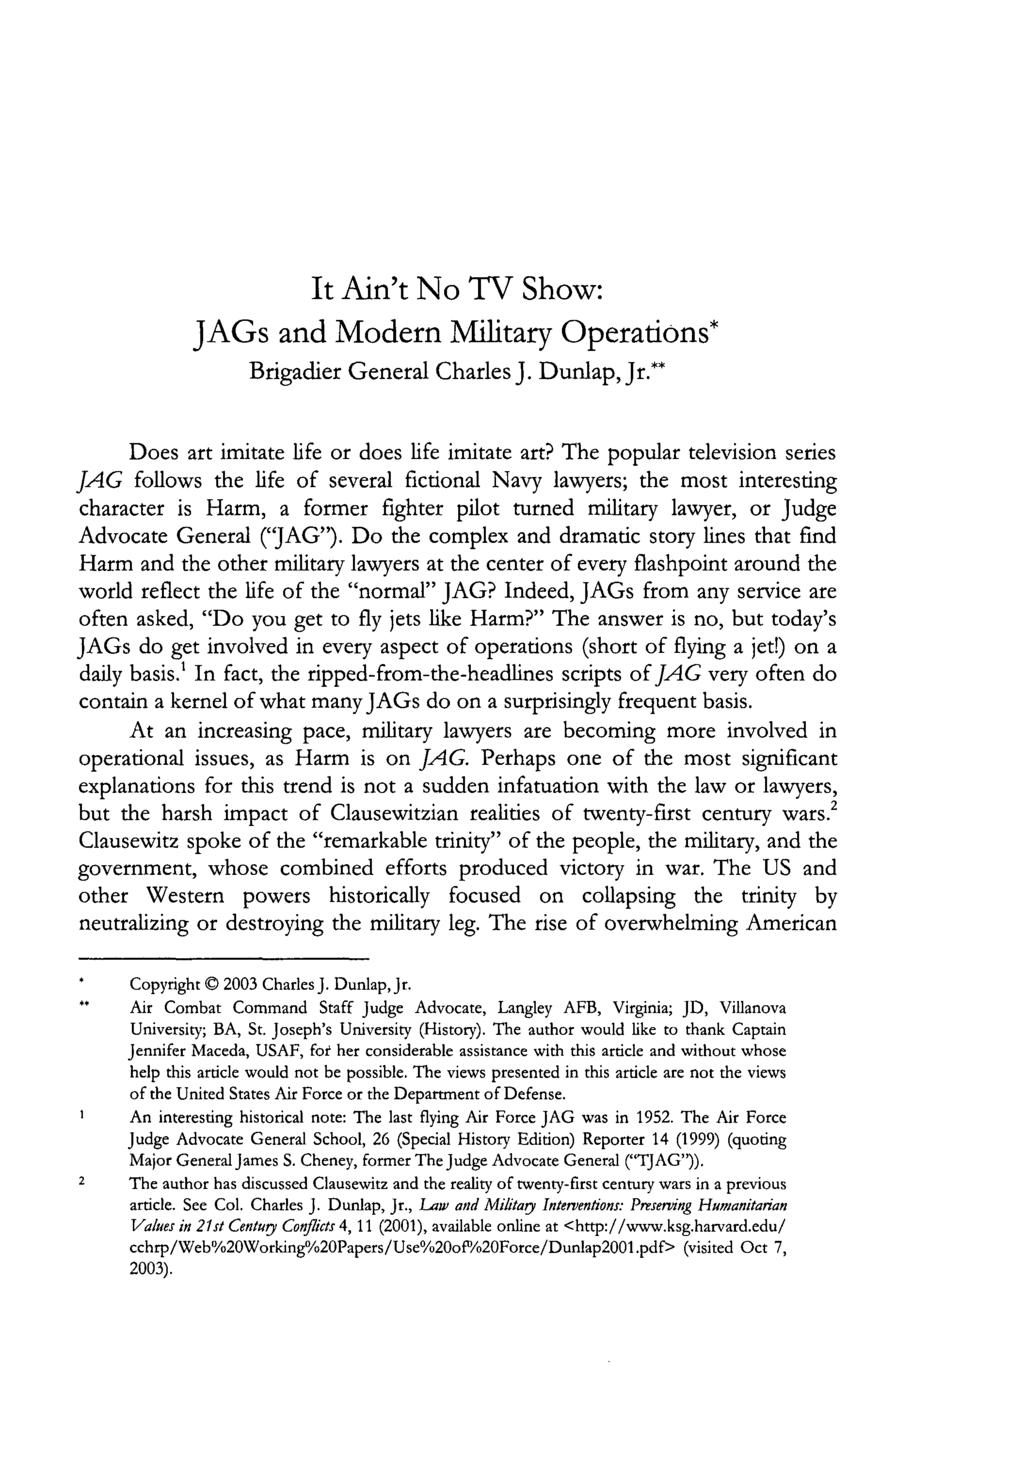 It Ain't No TV Show: JAGs and Modern Military Operations* Brigadier General Charles J. Dunlap, Jr.** Does art imitate life or does life imitate art?